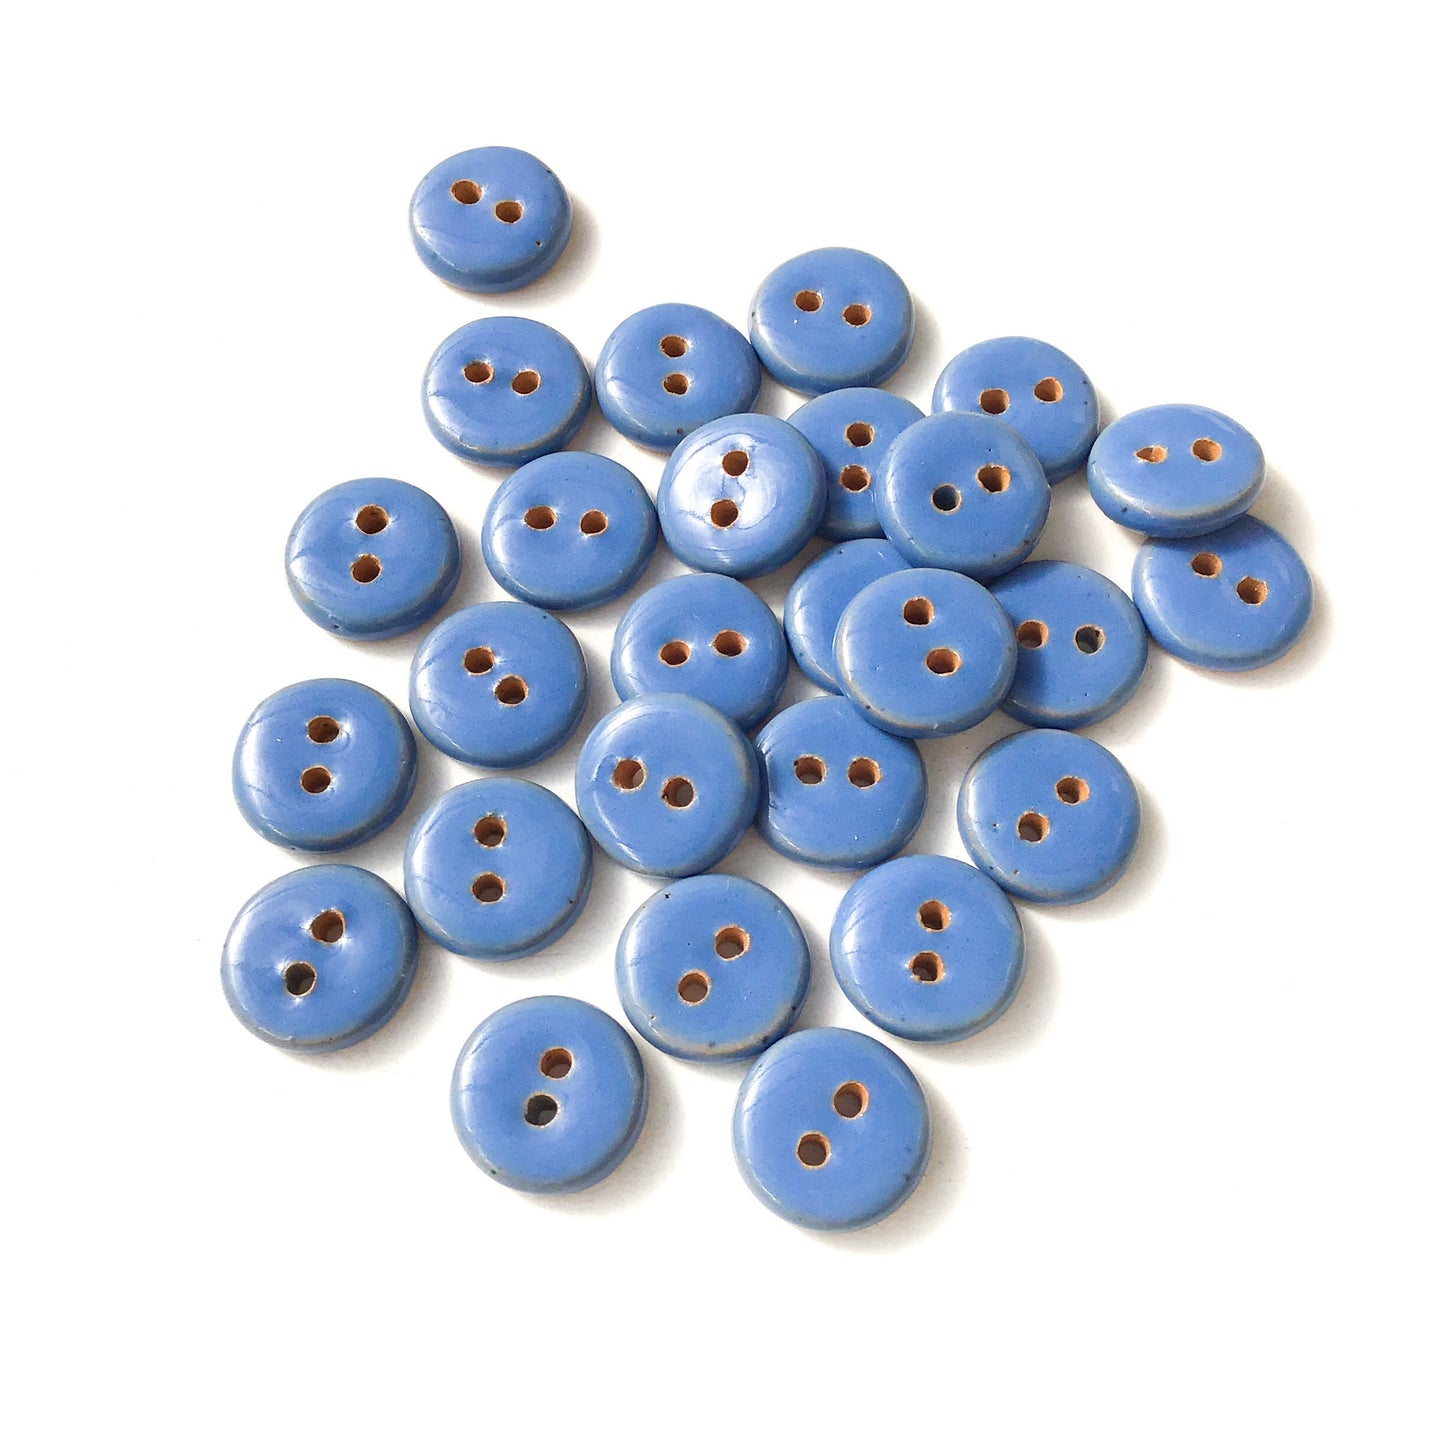 Cerulean Blue Ceramic Buttons - Blue Pottery Buttons - 9/16" (ws-40)